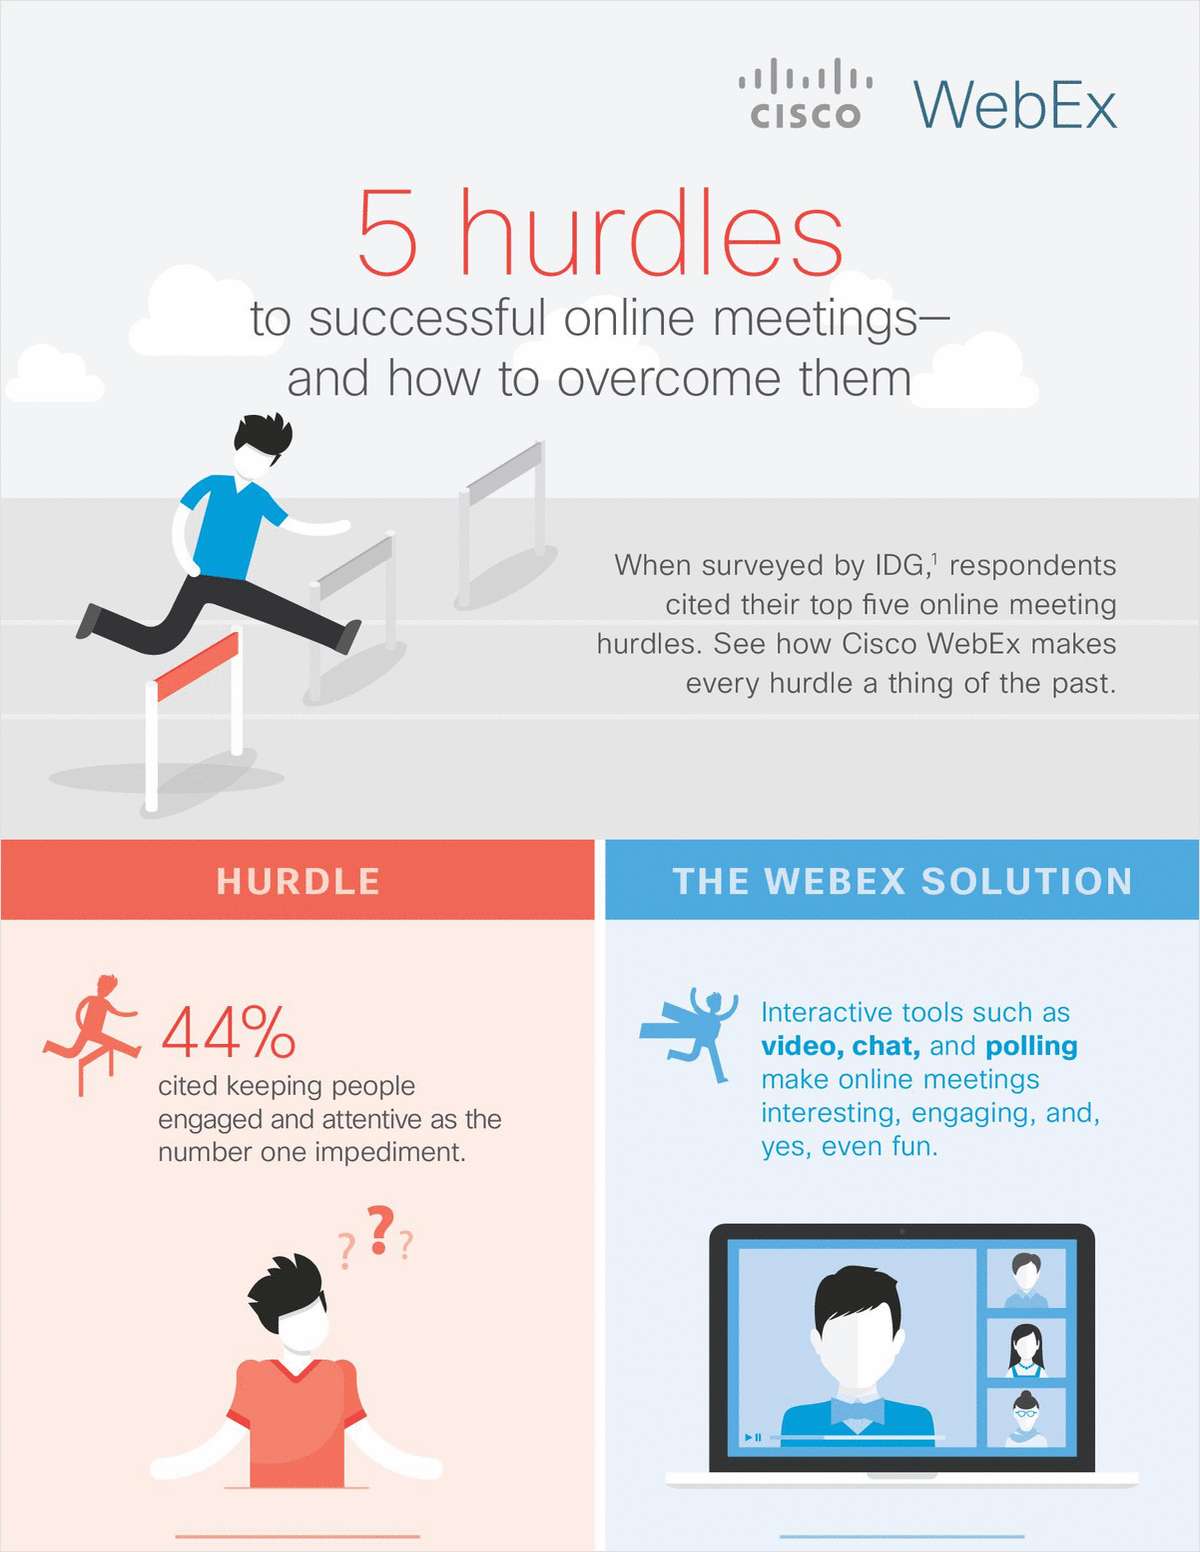 How to Overcome Hurdles to a Successful Online Meeting